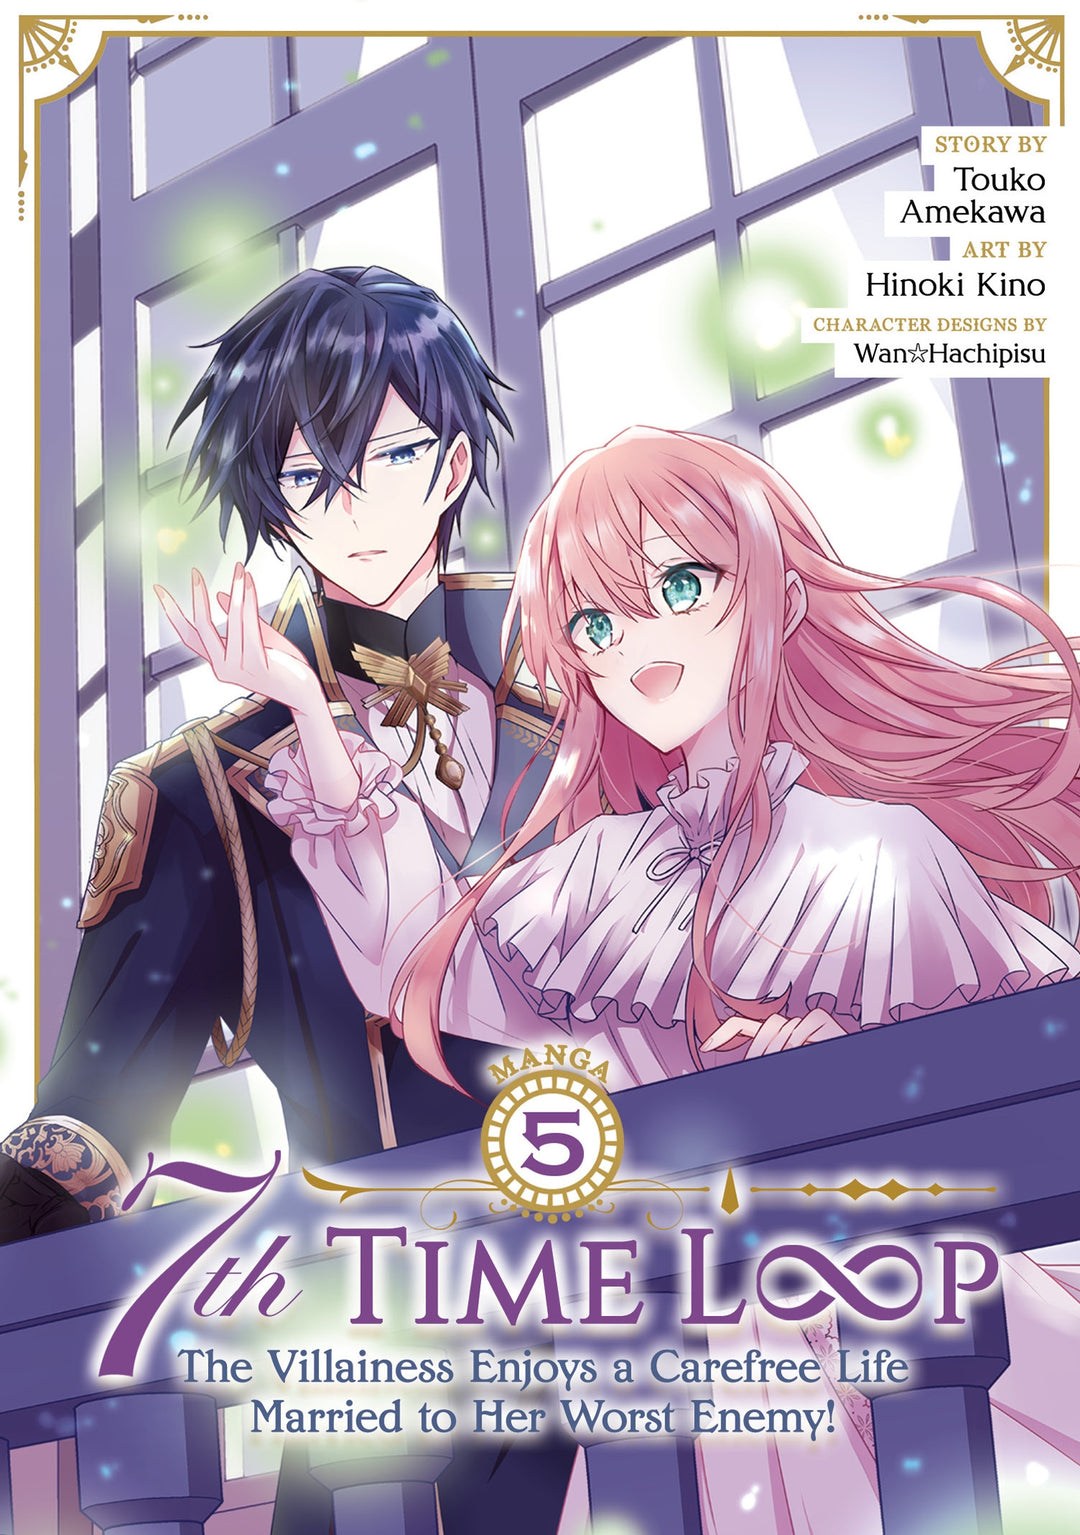 7th Time Loop The Villainess Enjoys a Carefree Life Married to Her Worst Enemy! (Manga) Vol. 05